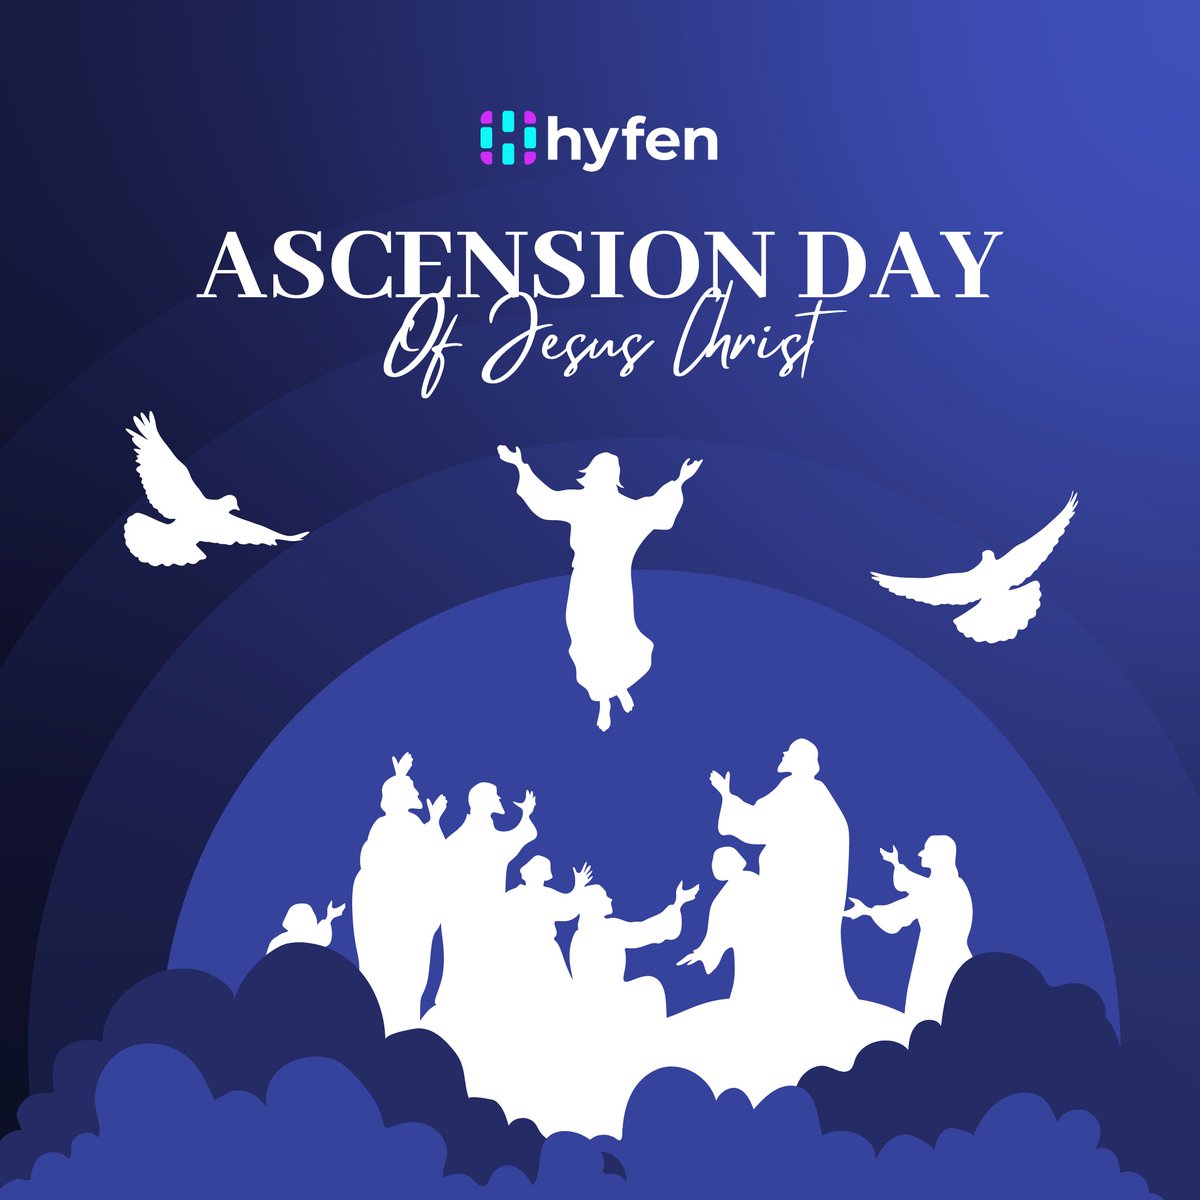 Let us celebrate Ascension Day by expressing gratitude to Jesus for all his blessings. Let us celebrate this day by visiting church. Wishing a very Happy Ascension Day.